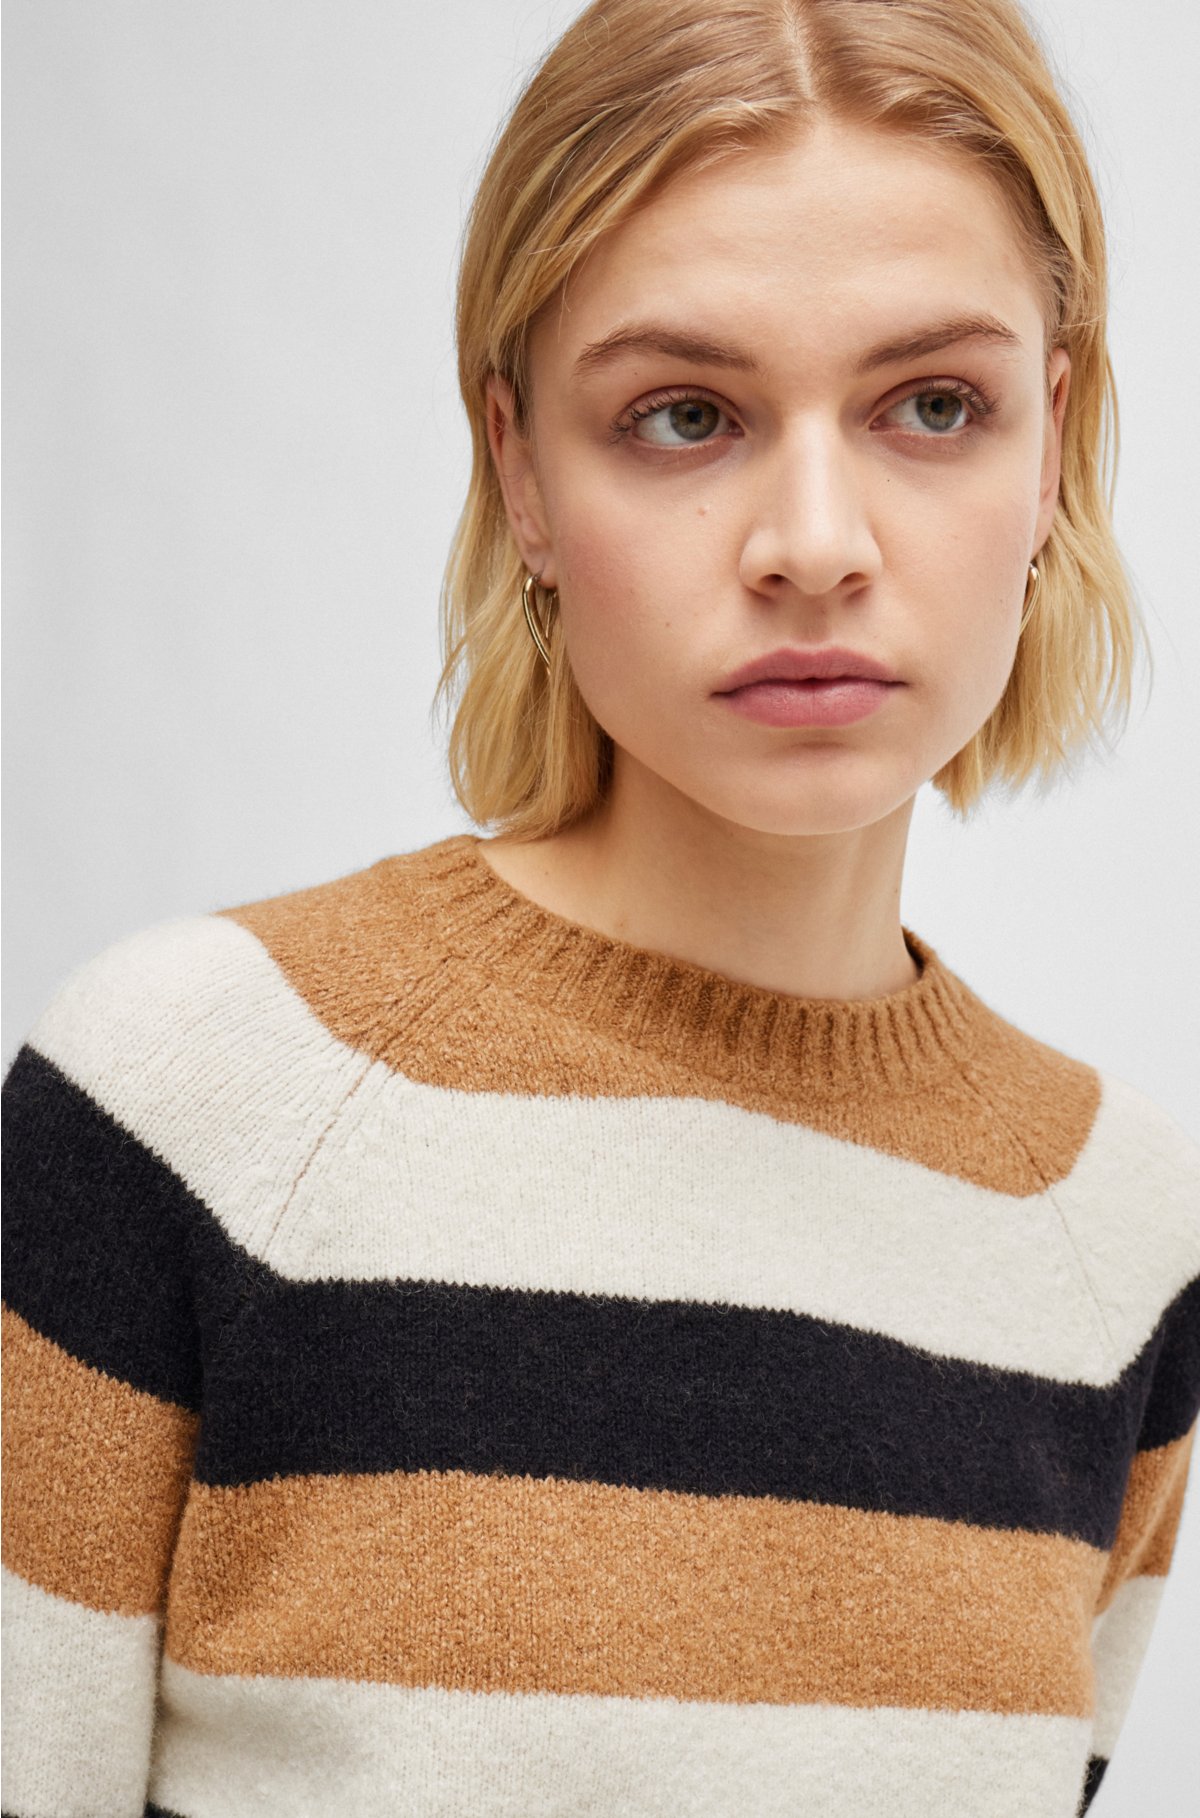 Extra-slim-fit sweater with block stripes, Beige Patterned